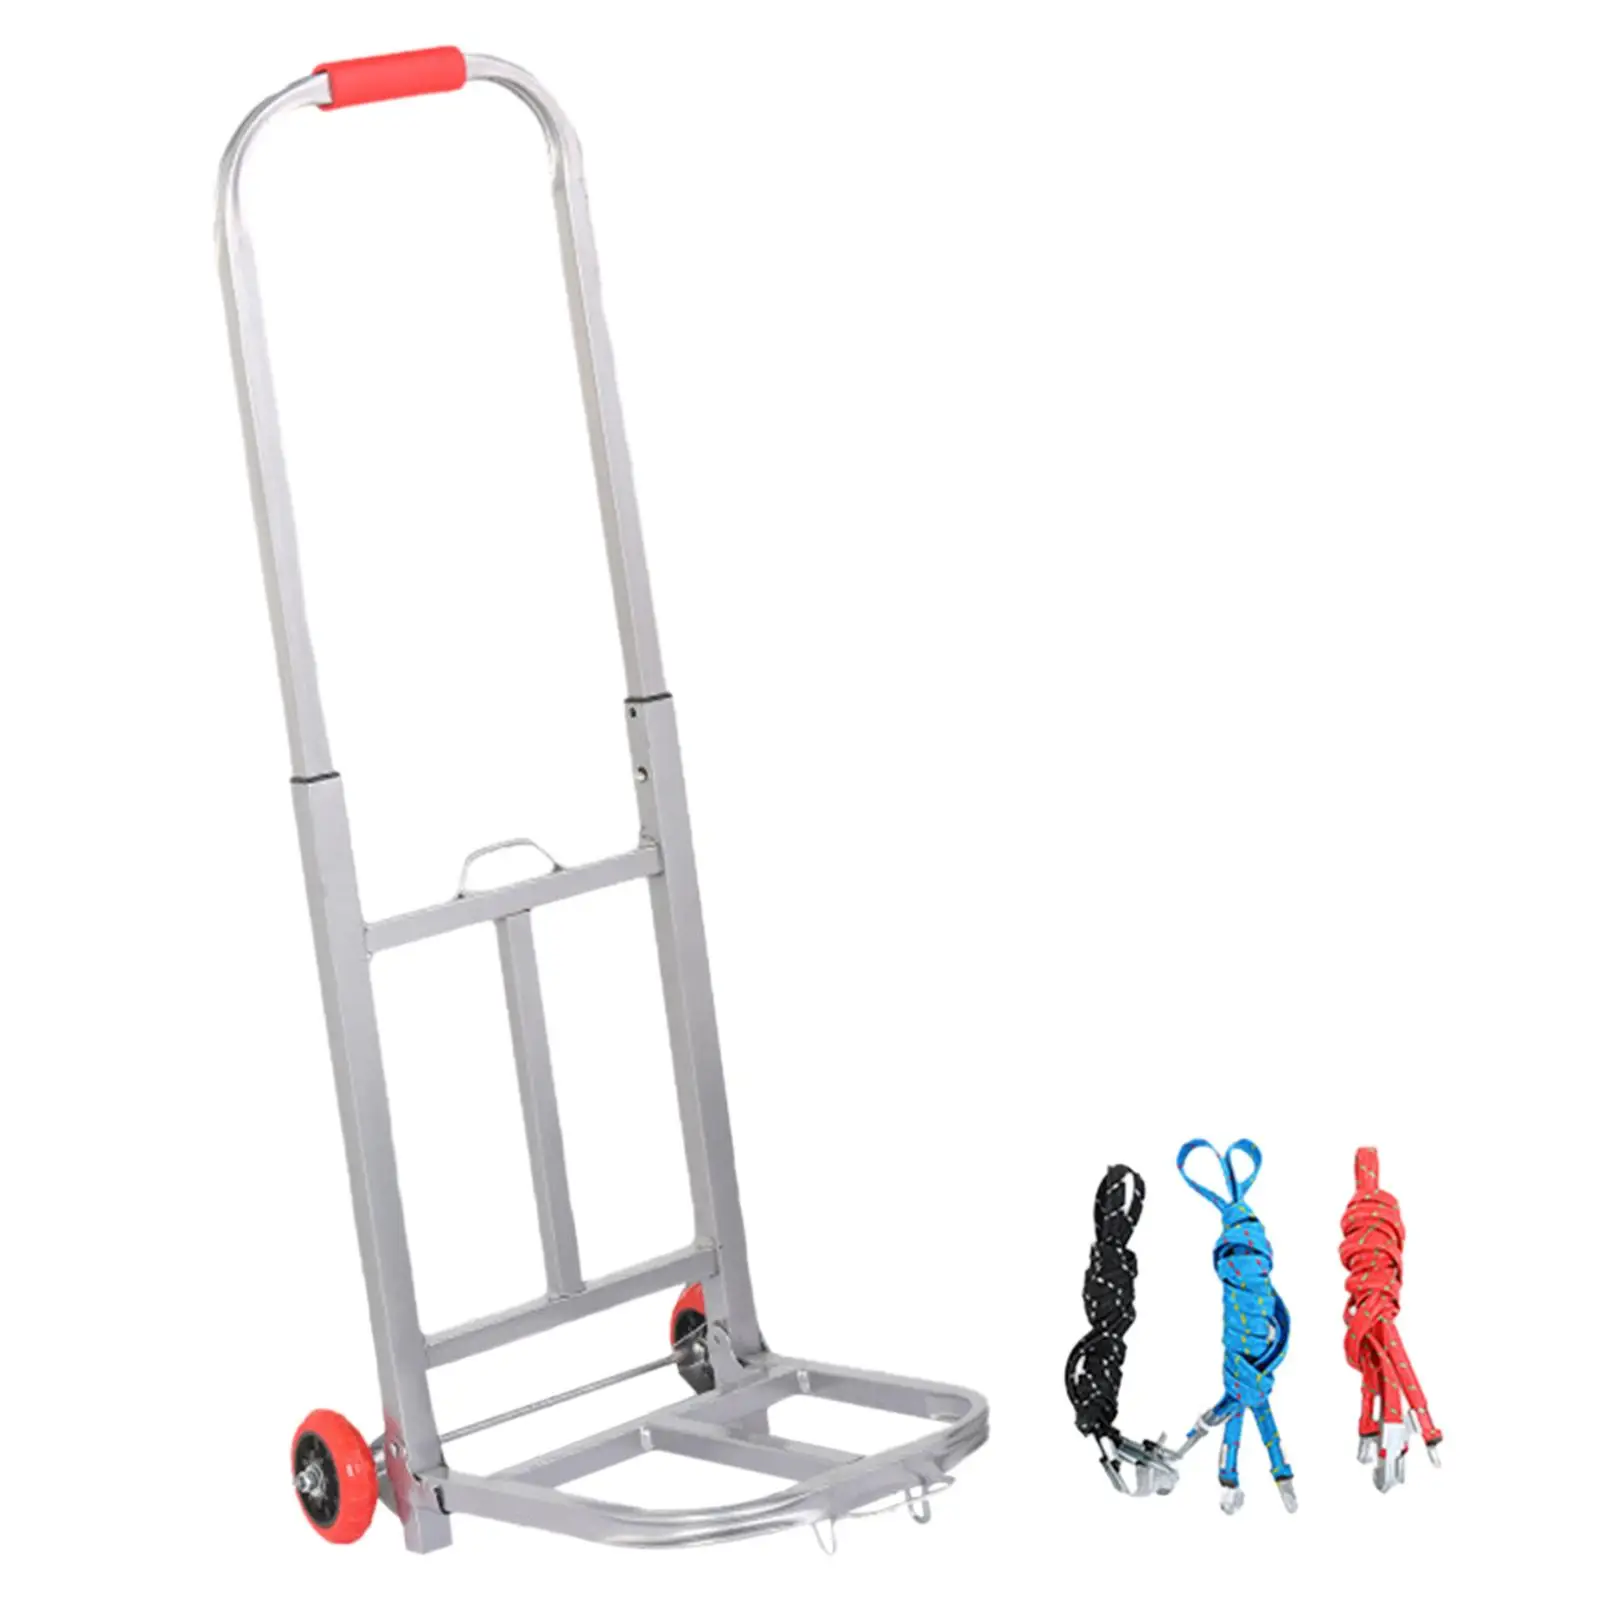 Foldable Folding Hand Truck Luggage Handcart Adjustable Handle for Daily Use